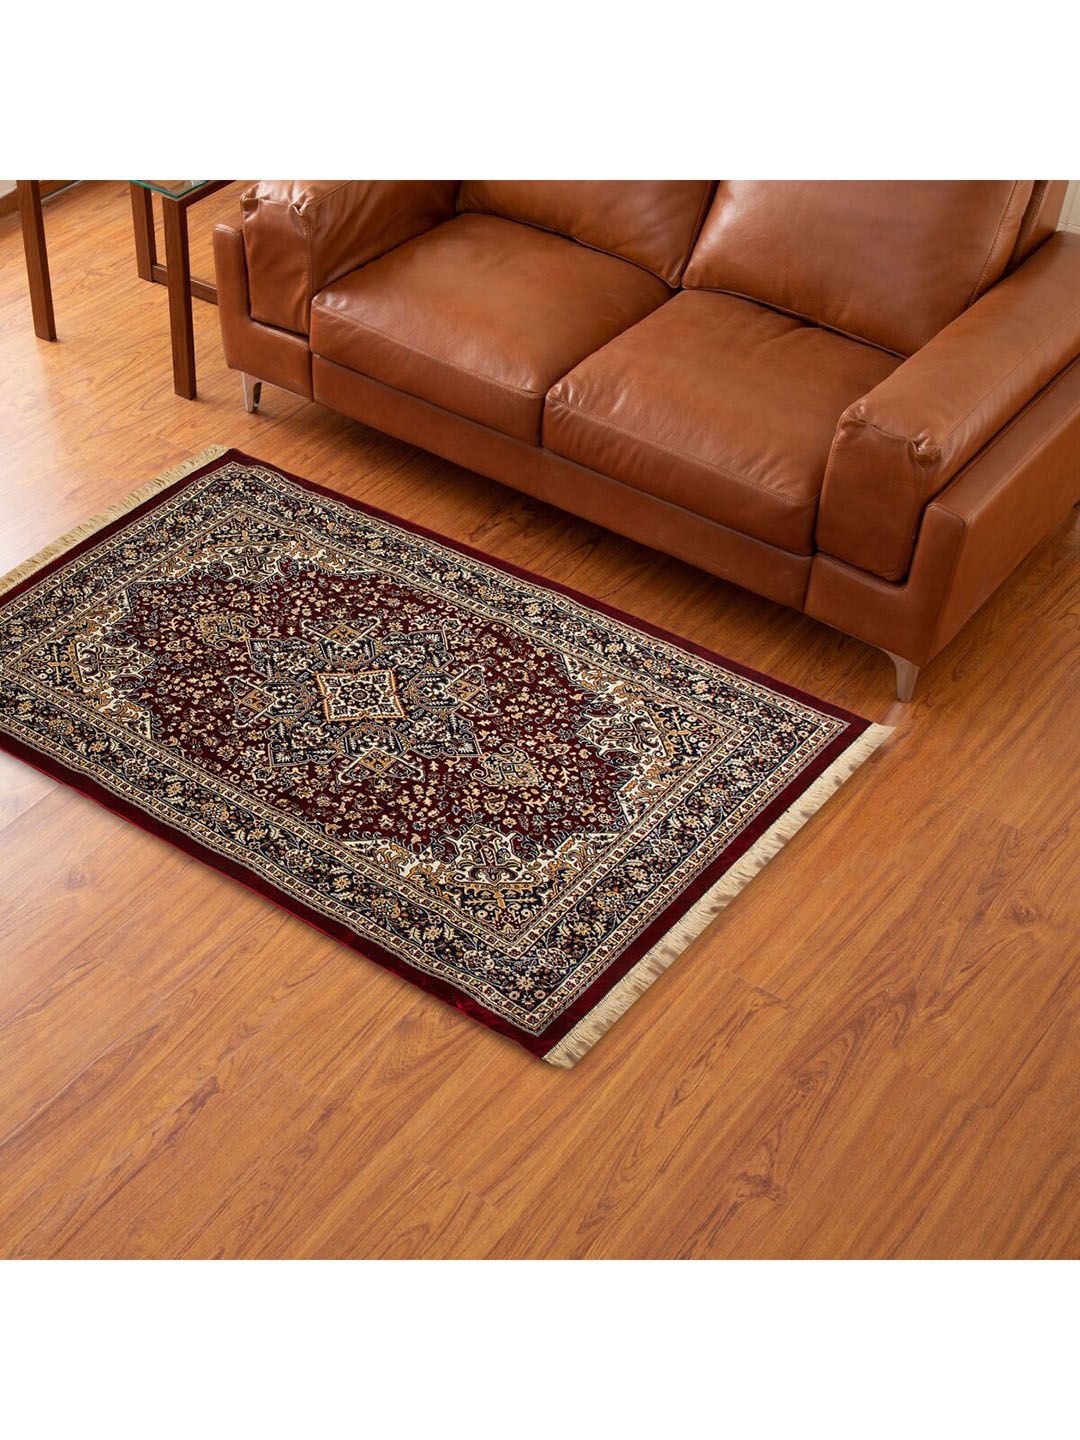 Home Centre Maroon & Beige Patterned Rectangular Anti-Skid Carpet Price in India